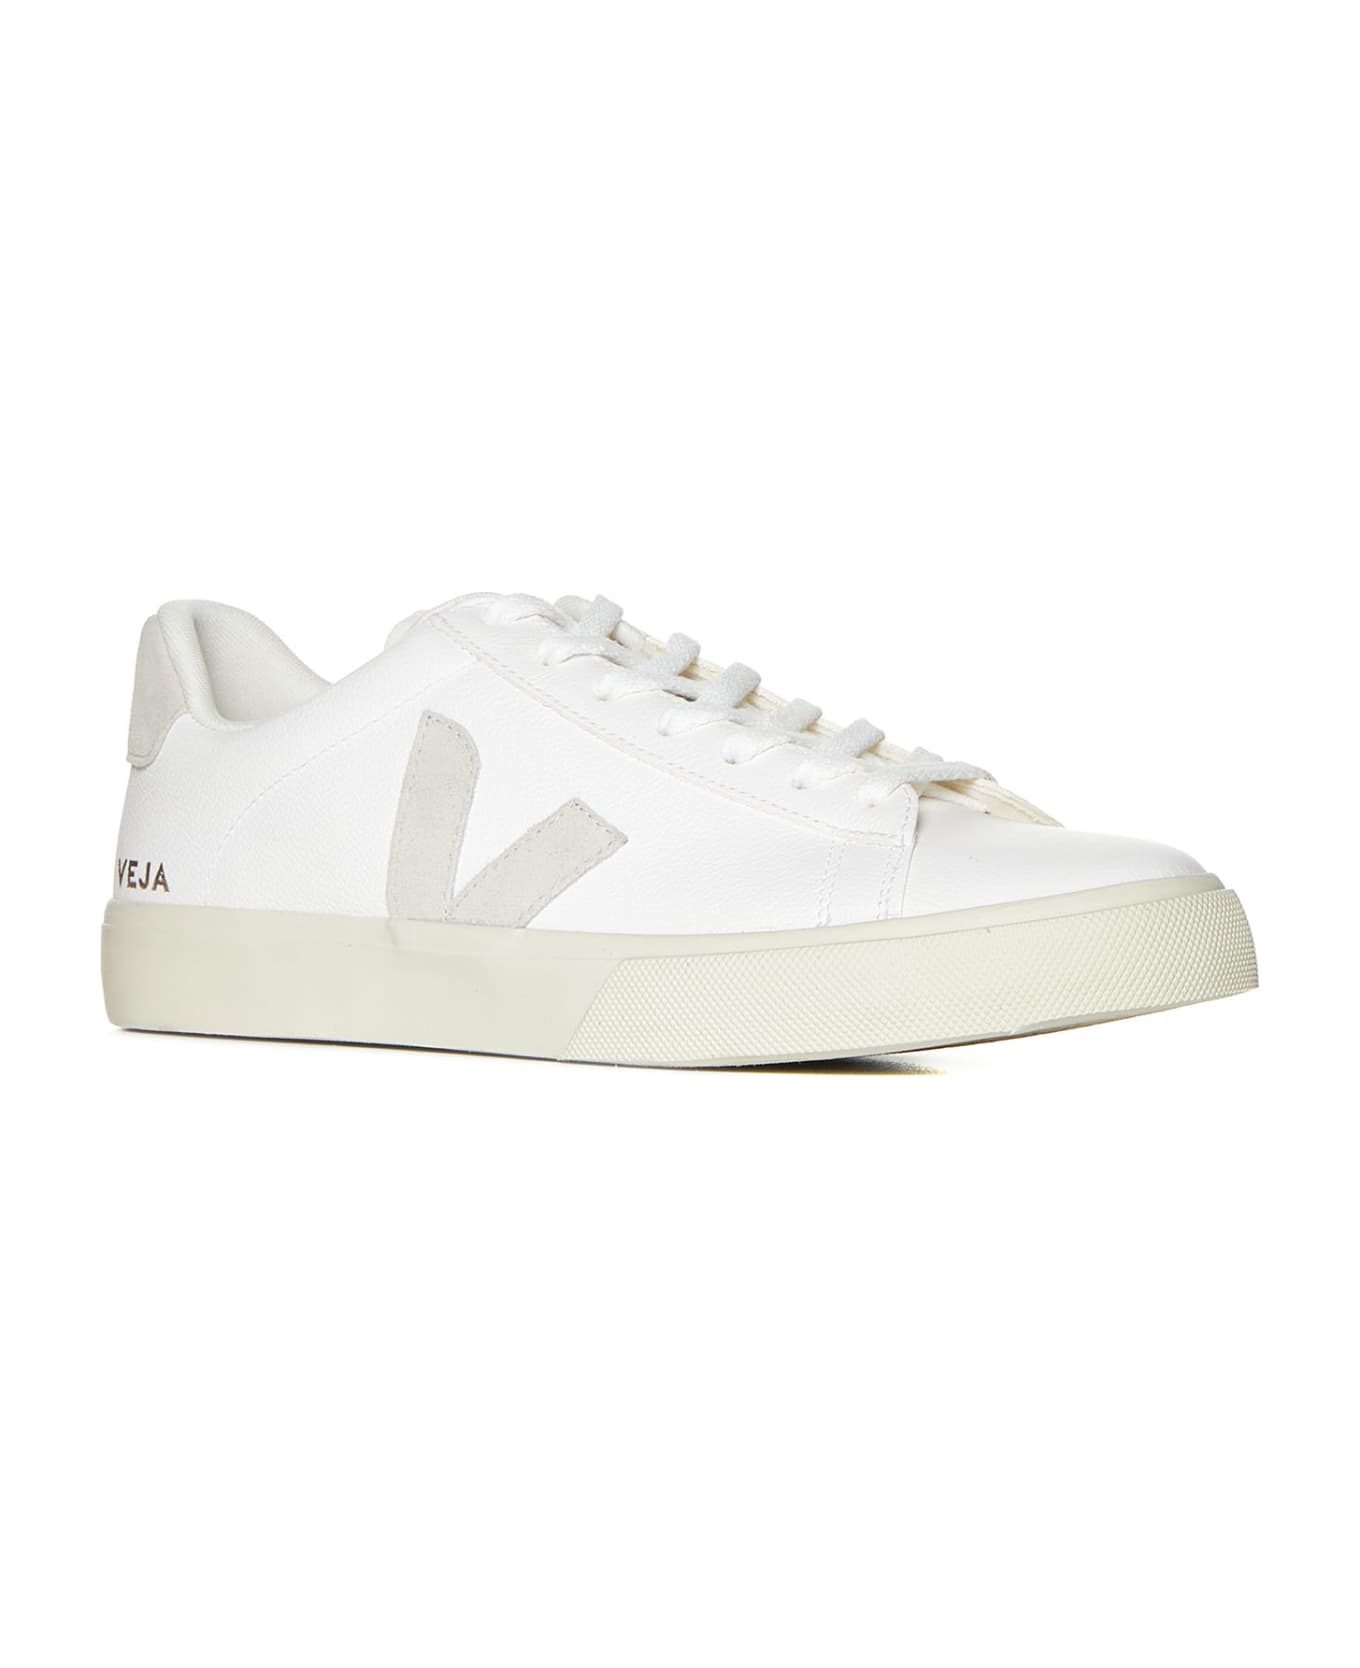 Veja Sneakers - EXTRA-WHITE_NATURAL-SUEDE